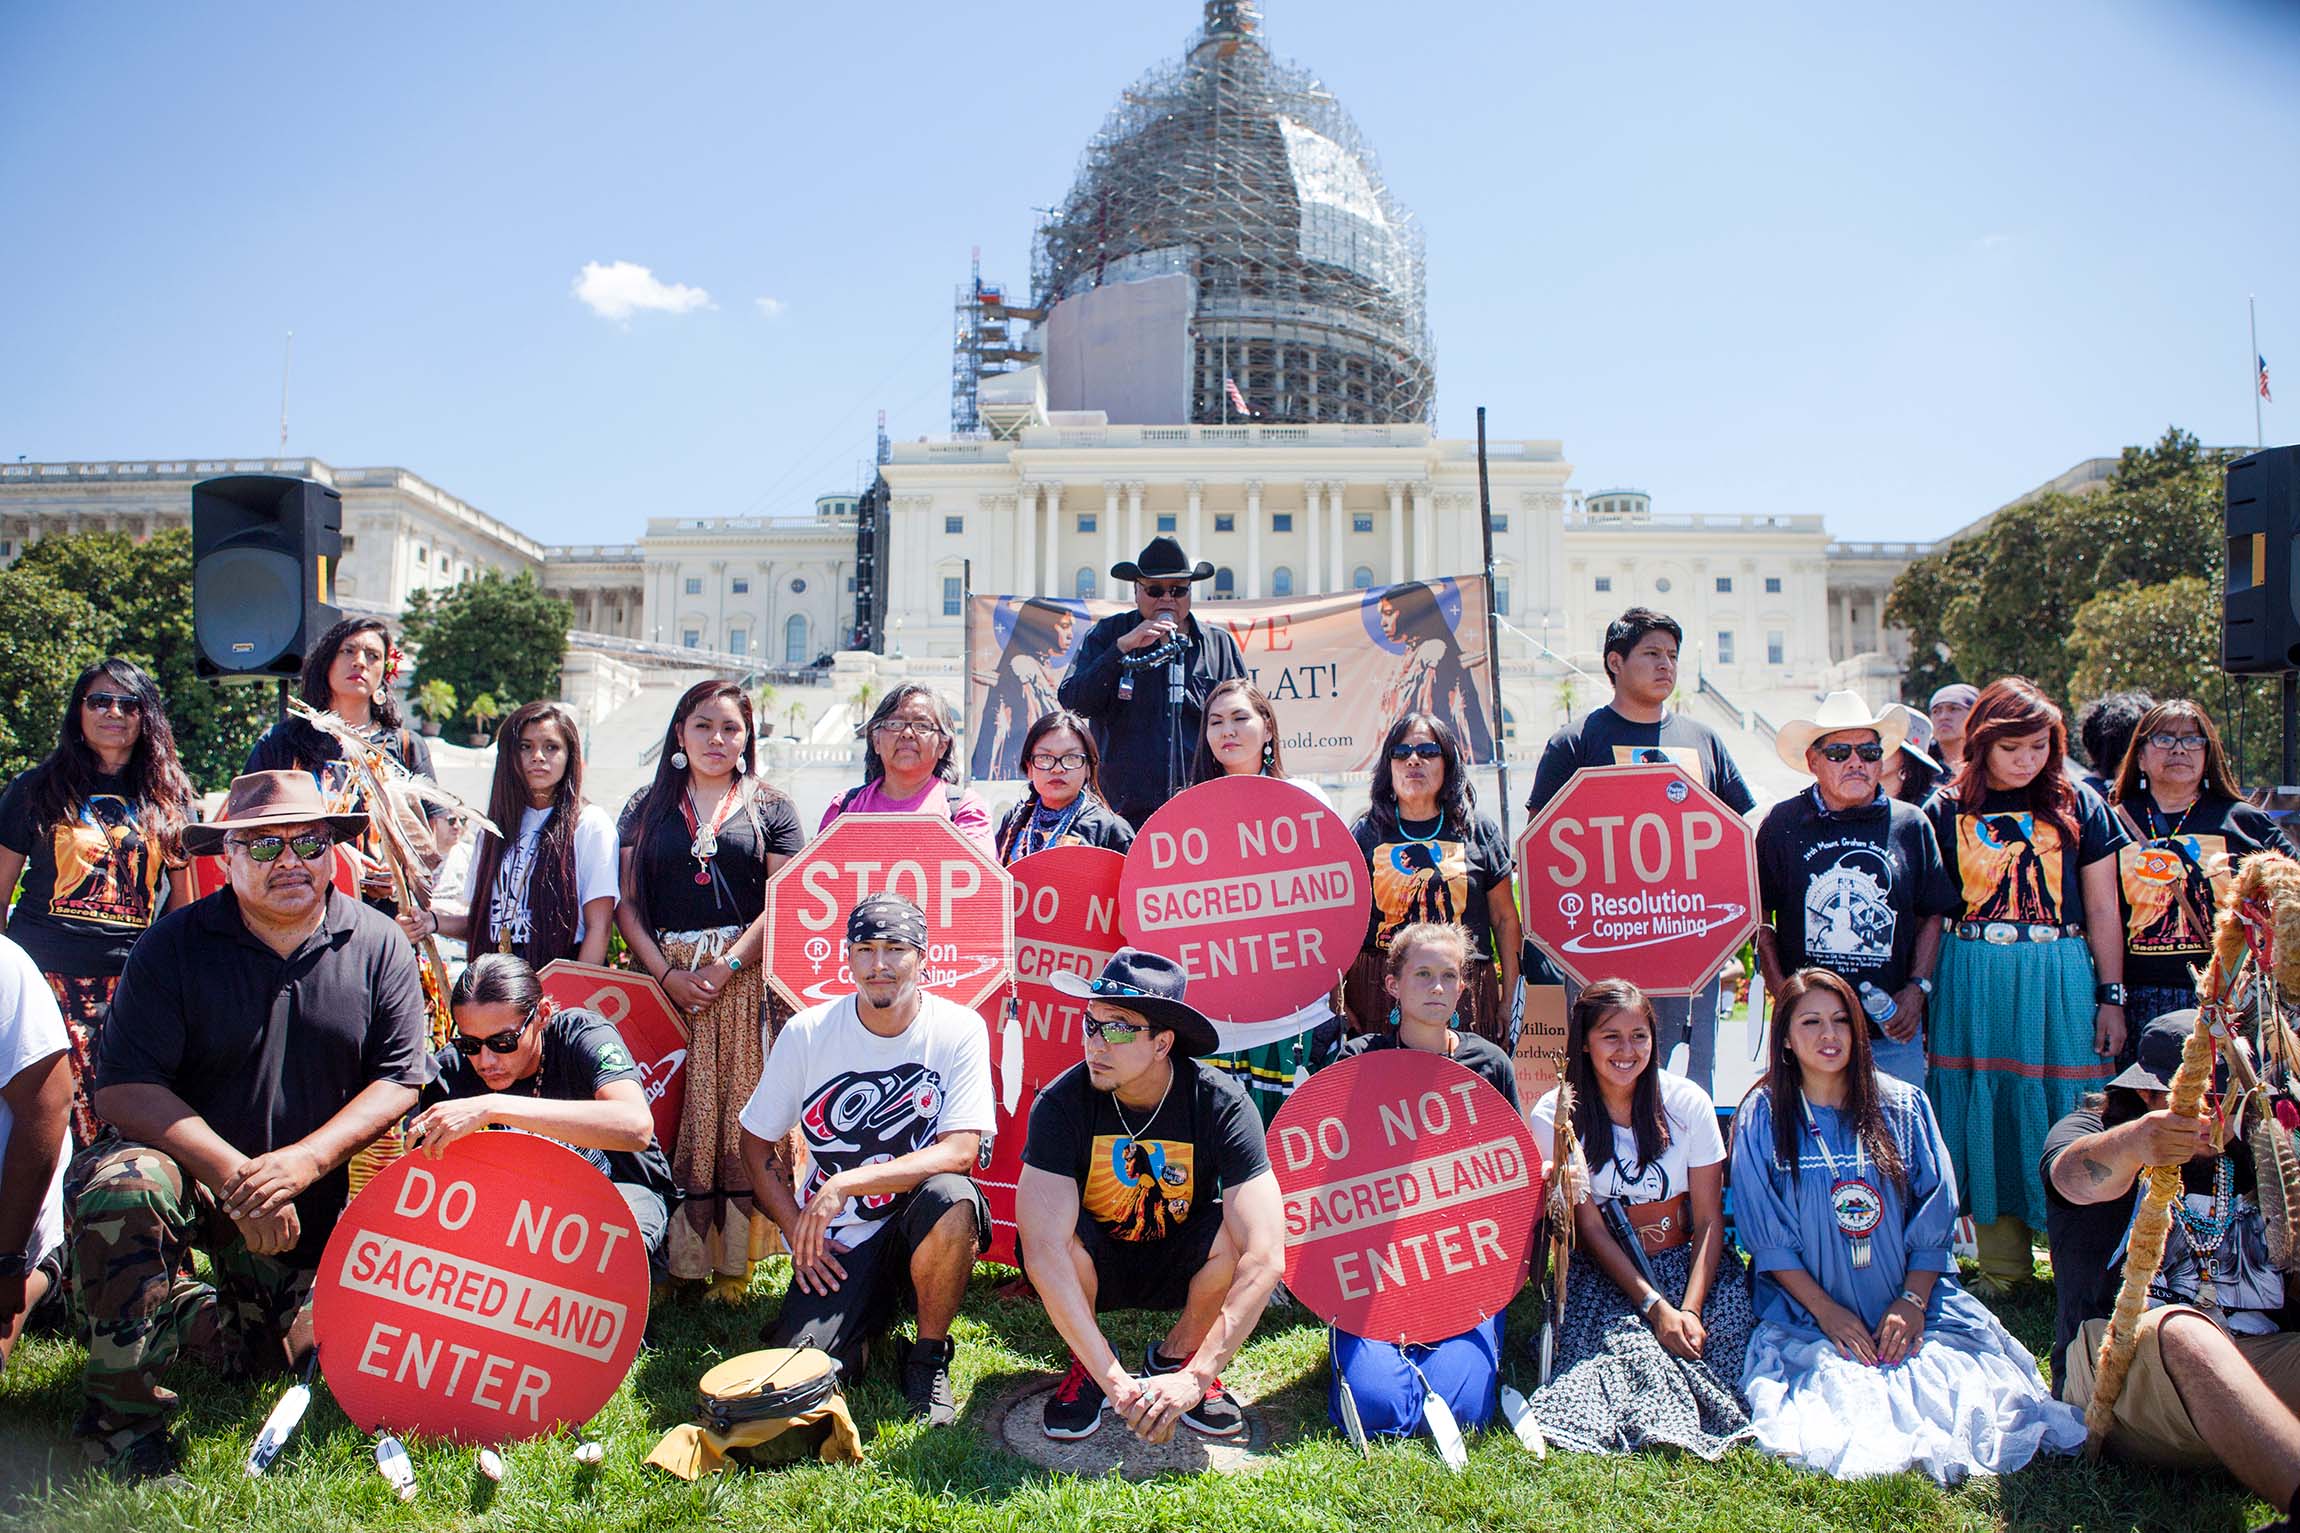 The Apache Stronghold marchers who crossed the U.S. from Arizona rally at the The Capitol in Washington, D.C., July 22, 2015. (Photo courtesy of © Robert Meyers/Greenpeace).